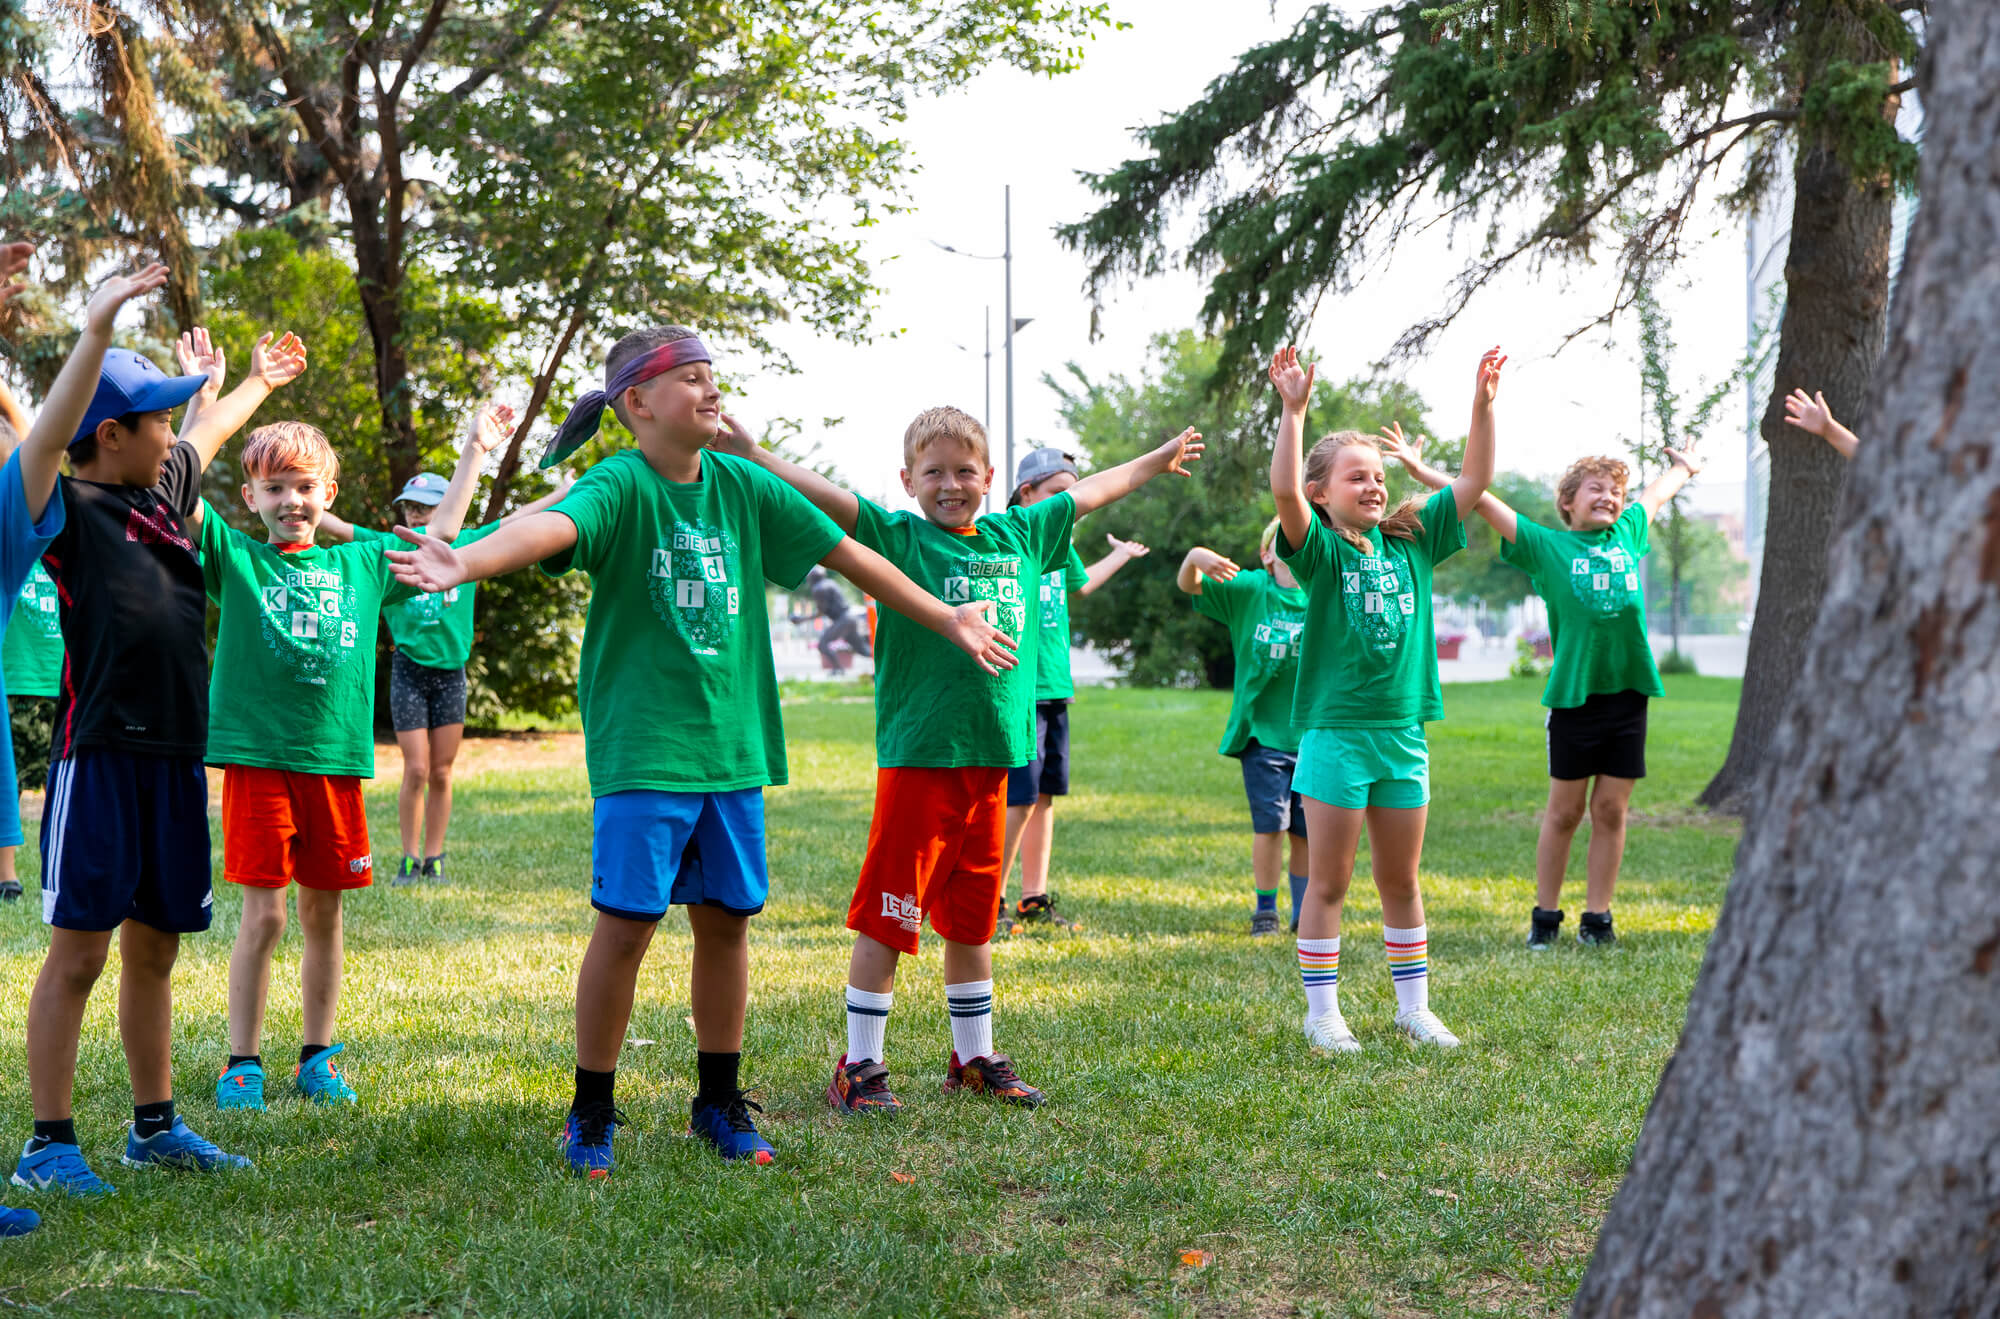 Kid's doing jumping jacks outside in Confederation Park during a summer Kids Camp